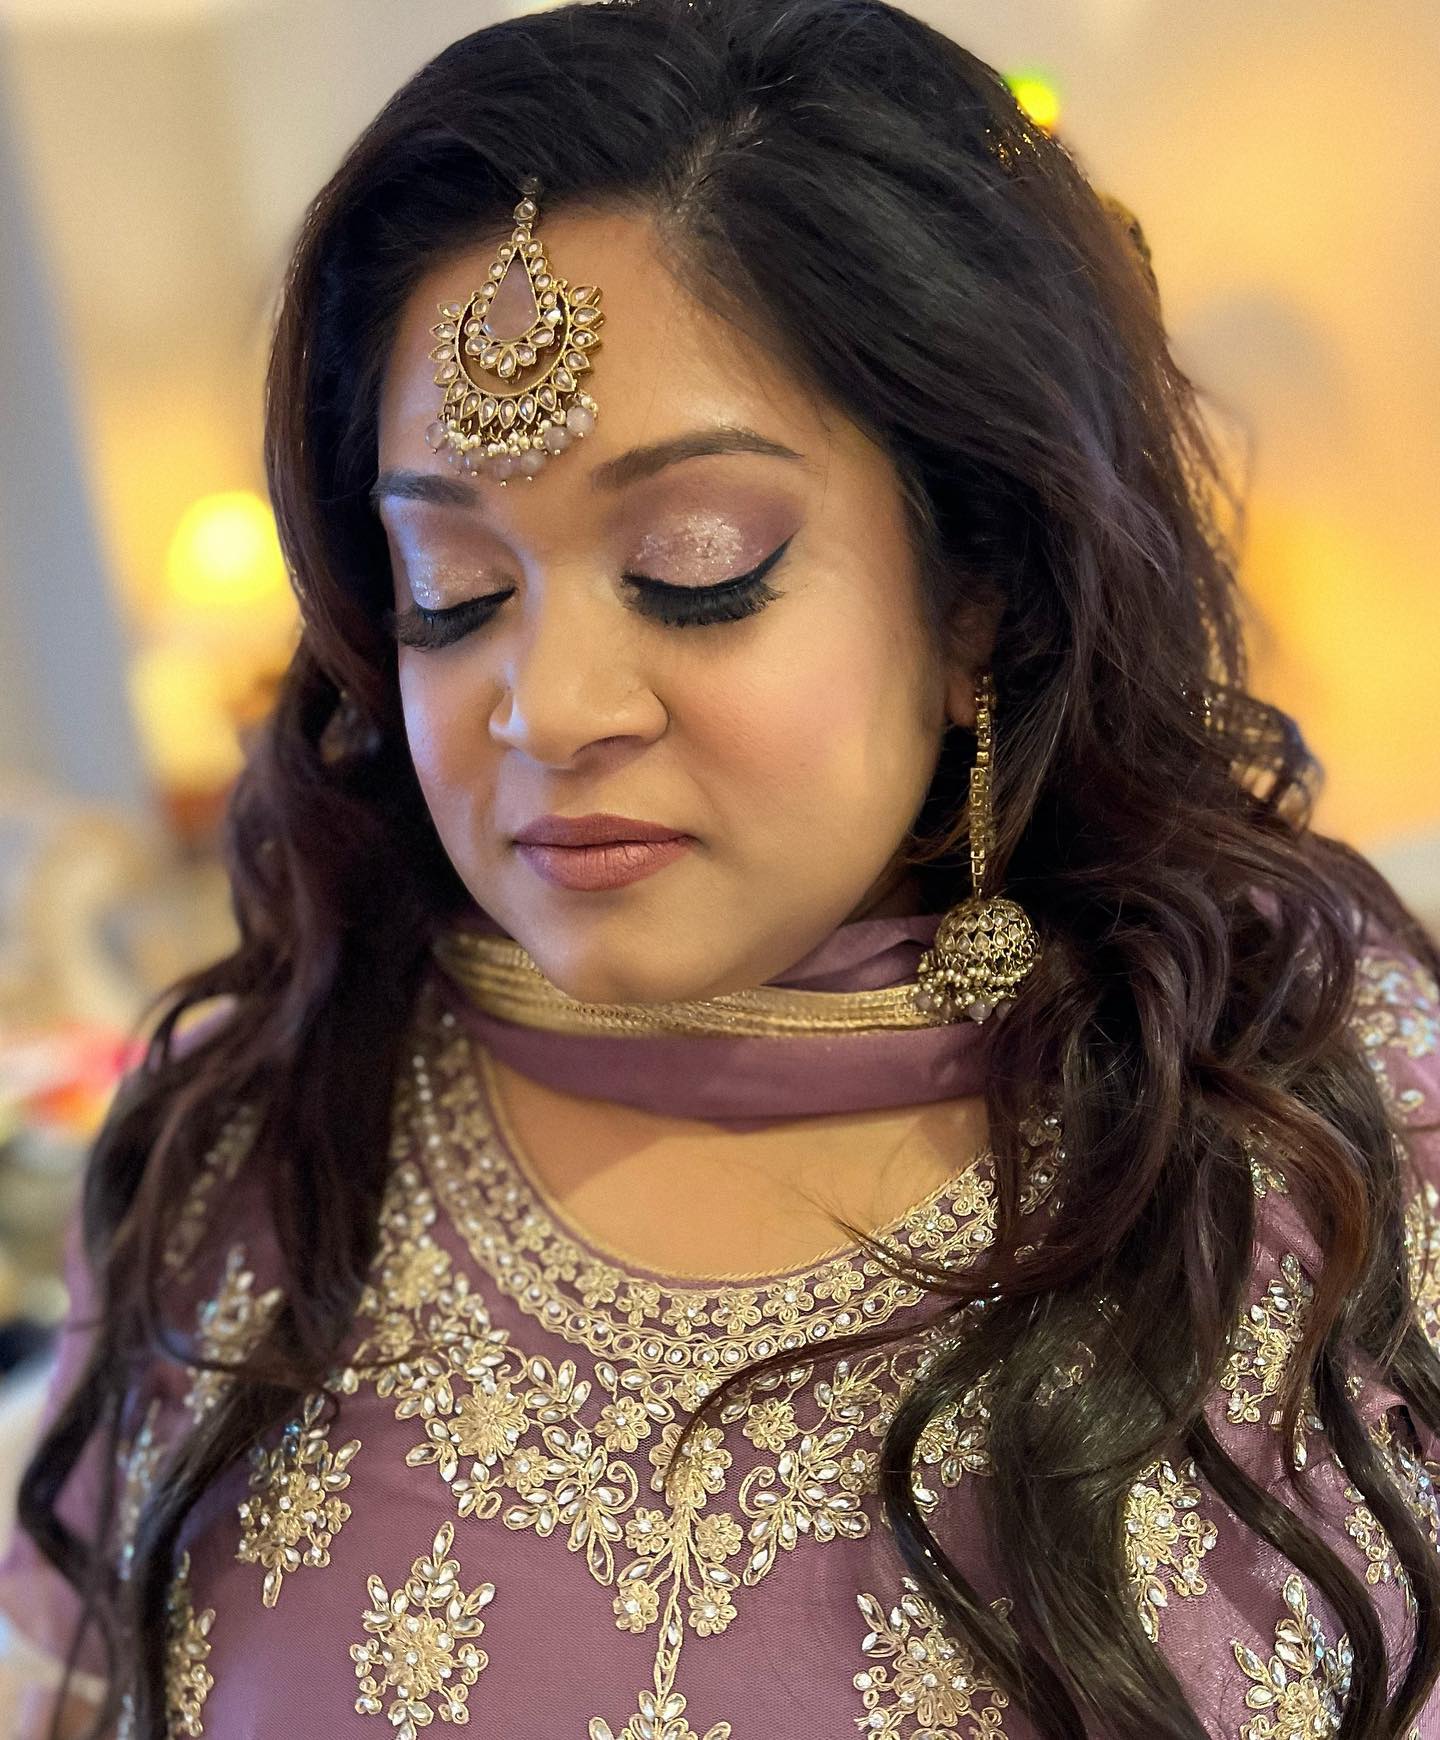 Throw🔙 Tuesday… going through photos of looks I’ve created in recent months/weeks for some gorgeous ladies! 💜

———————————————————————————
❗️Taking all 2022/2023 bridal and 2022 non-bridal bookings! Secure a booking for your next event via the link in my bio.
———————————————————————————
❗️1:1 Personal Makeup Lessons Now Available. Enquire via the website in bio for more information.
———————————————————————————
#makeupartistsydney  #sydneymakeupartist #sydneymakeupartists  #100wattskin #glowyskin #maccosmetics #brideoftheday #glammakeup #indiandesigners  #weddingmakeup #fullglam 
 #wedding #maccosmetics #glowingbride #dewyskin #indianwedding #toptags #motd #glameyes #ootd #photoshoot #instafashion #naturalglam #makeup  #indianbride #partymakeup #specialoccasionmakeup